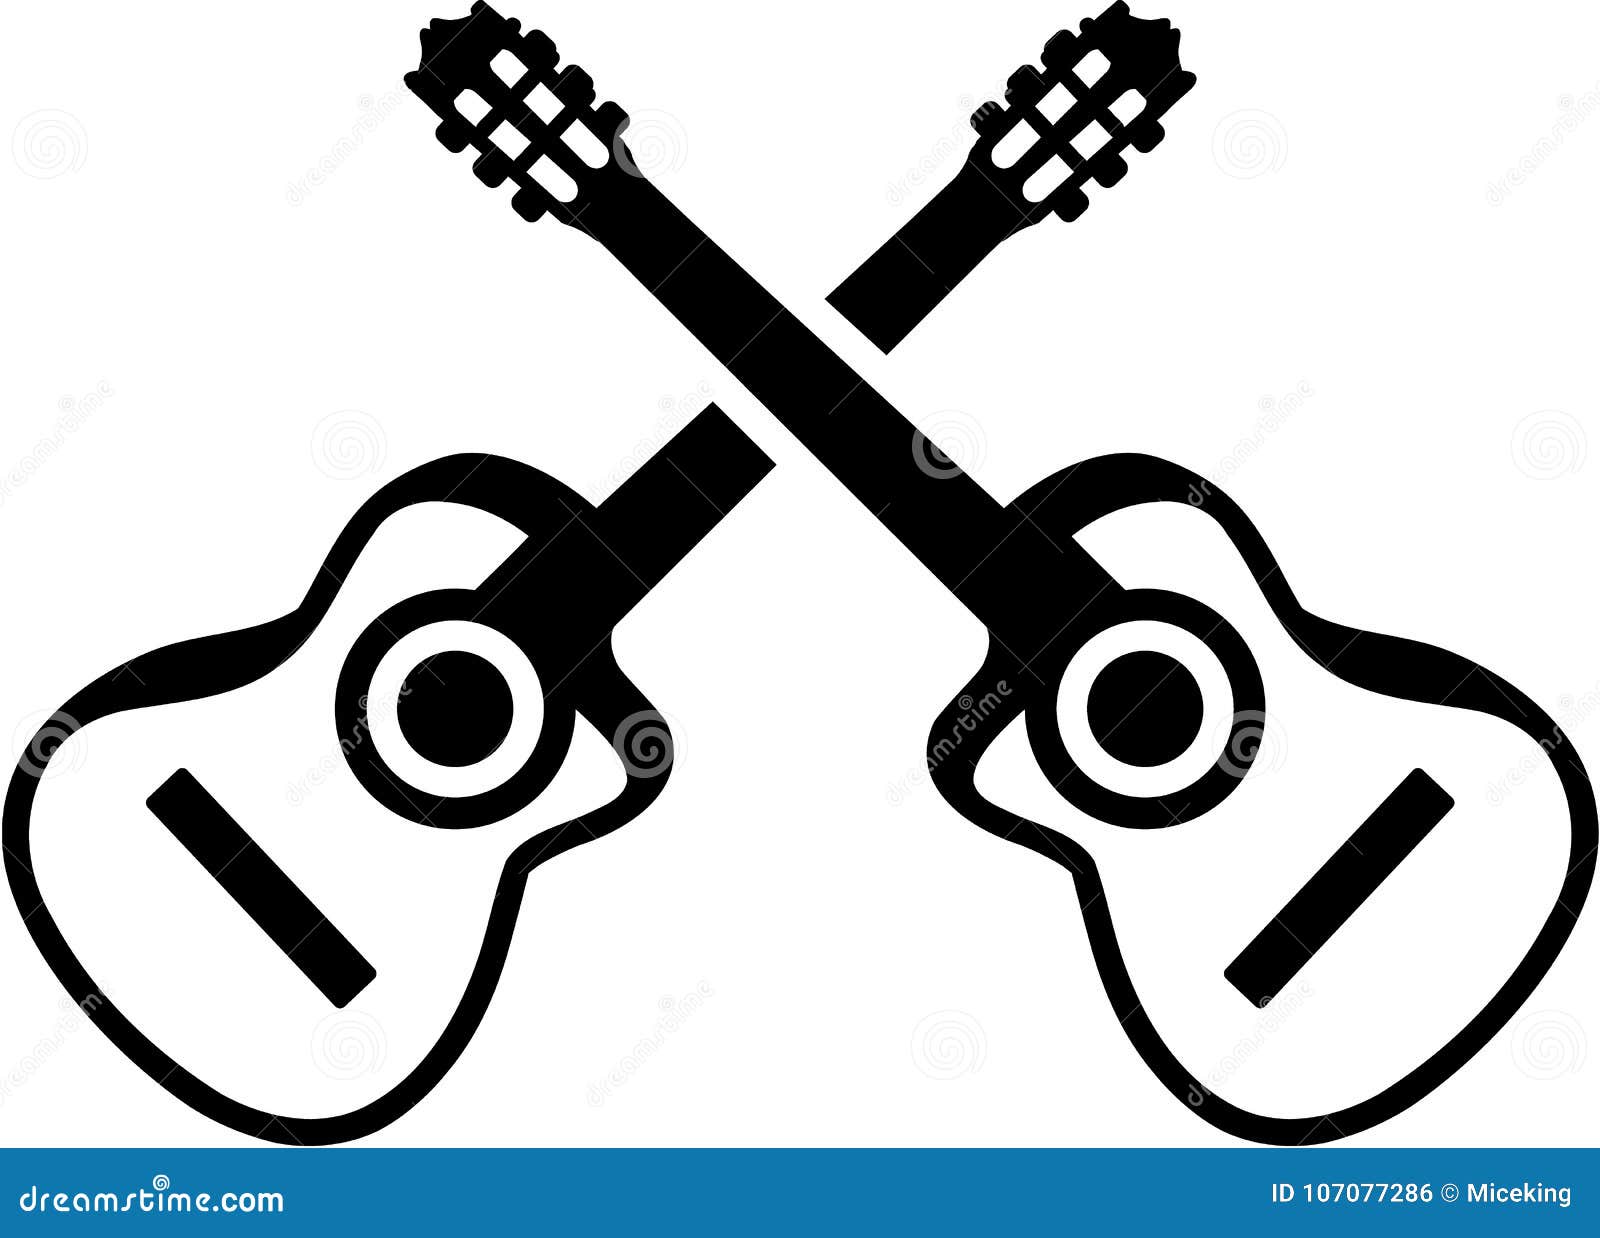 Acoustic Guitars Crossed Stock Vector Illustration Of Melody 107077286